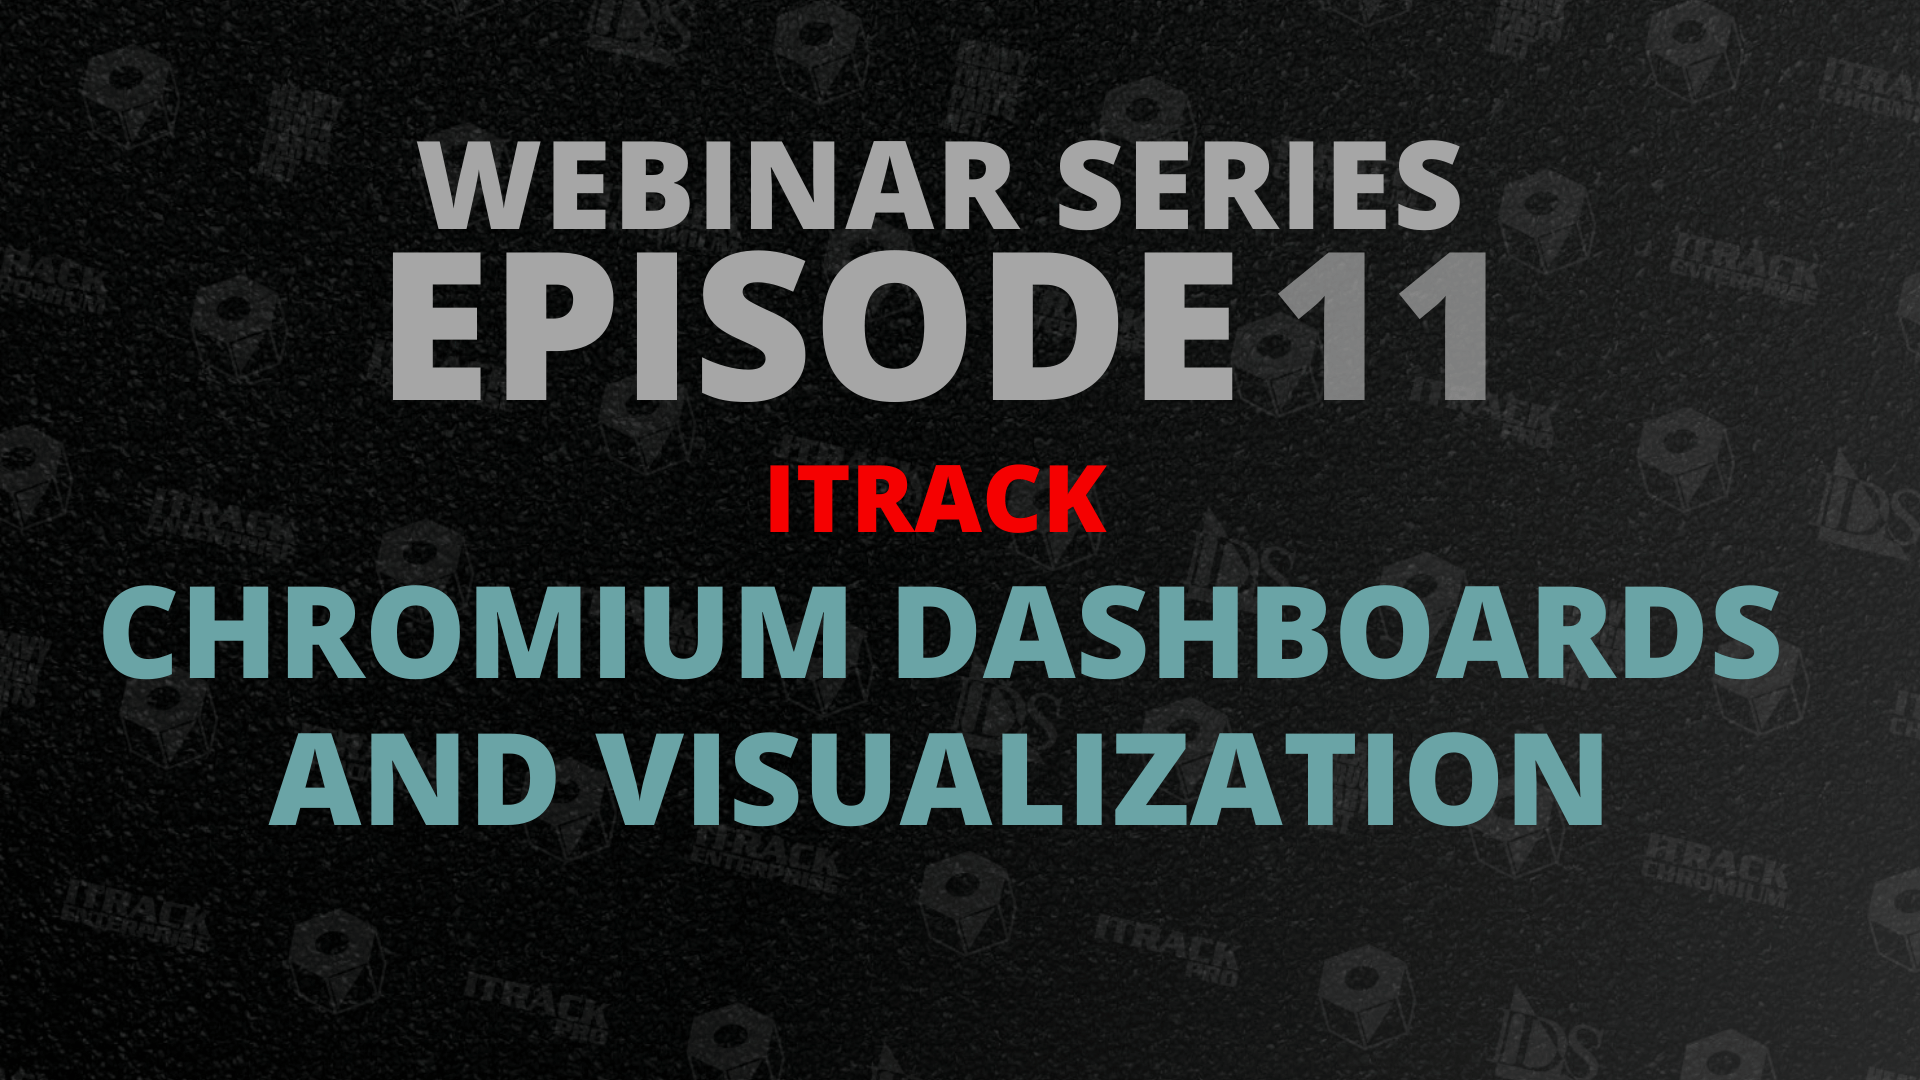 Featured image for “Chromium Dashboards and Visualization”